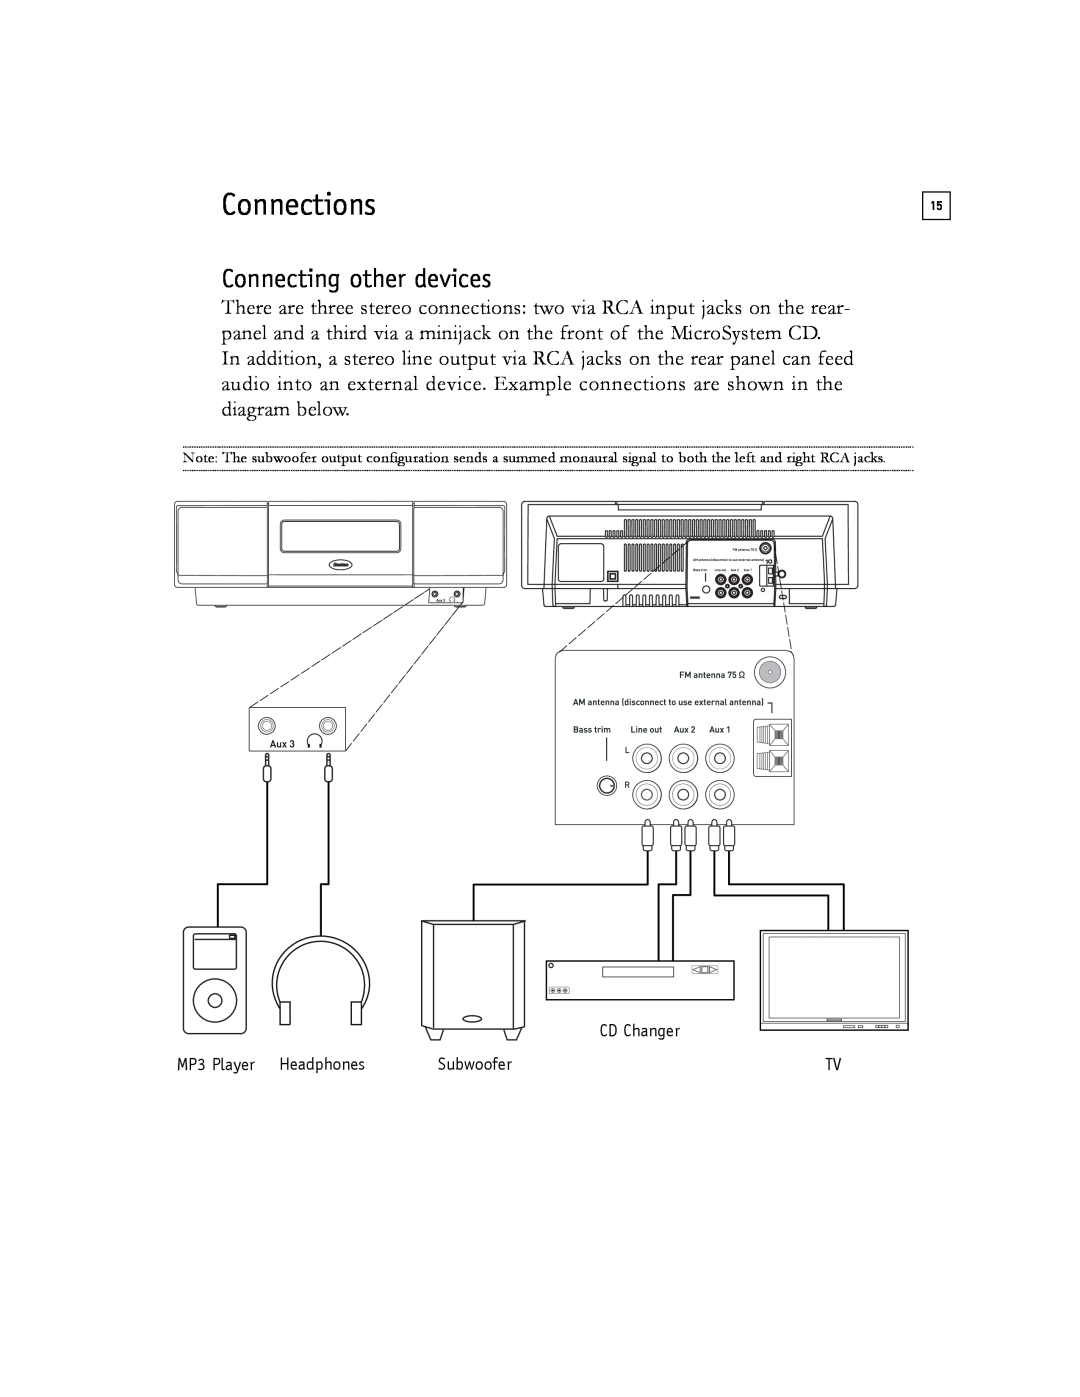 Boston Acoustics Shelf Stereo System owner manual Connections, Connecting other devices 